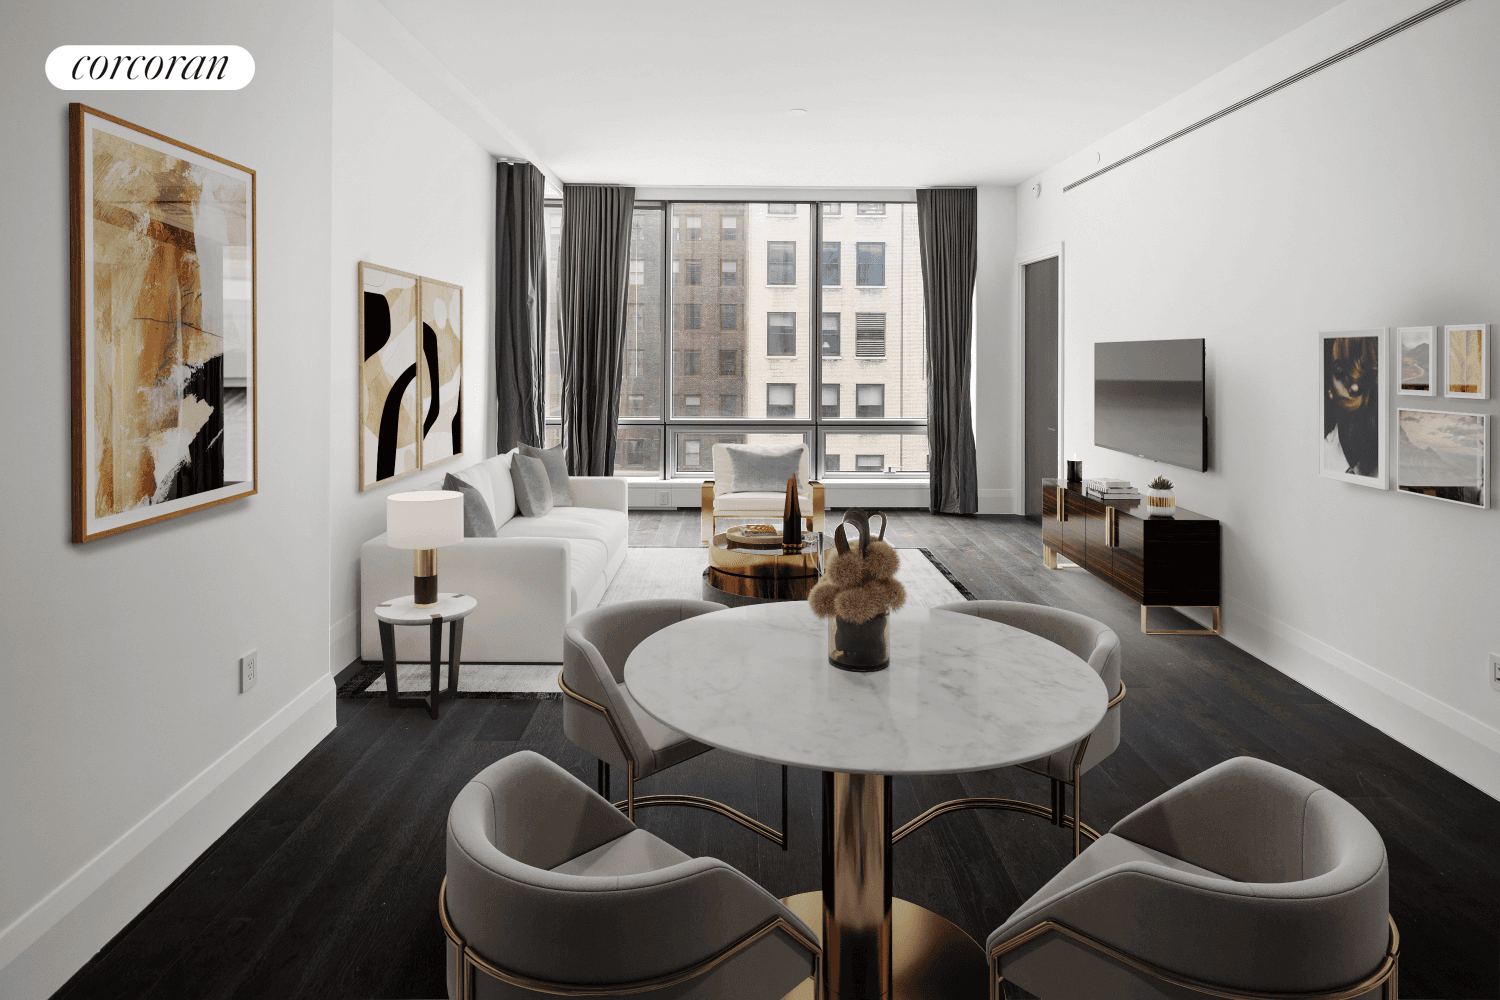 Introducing Residence 7B at 172 Madison Avenue.